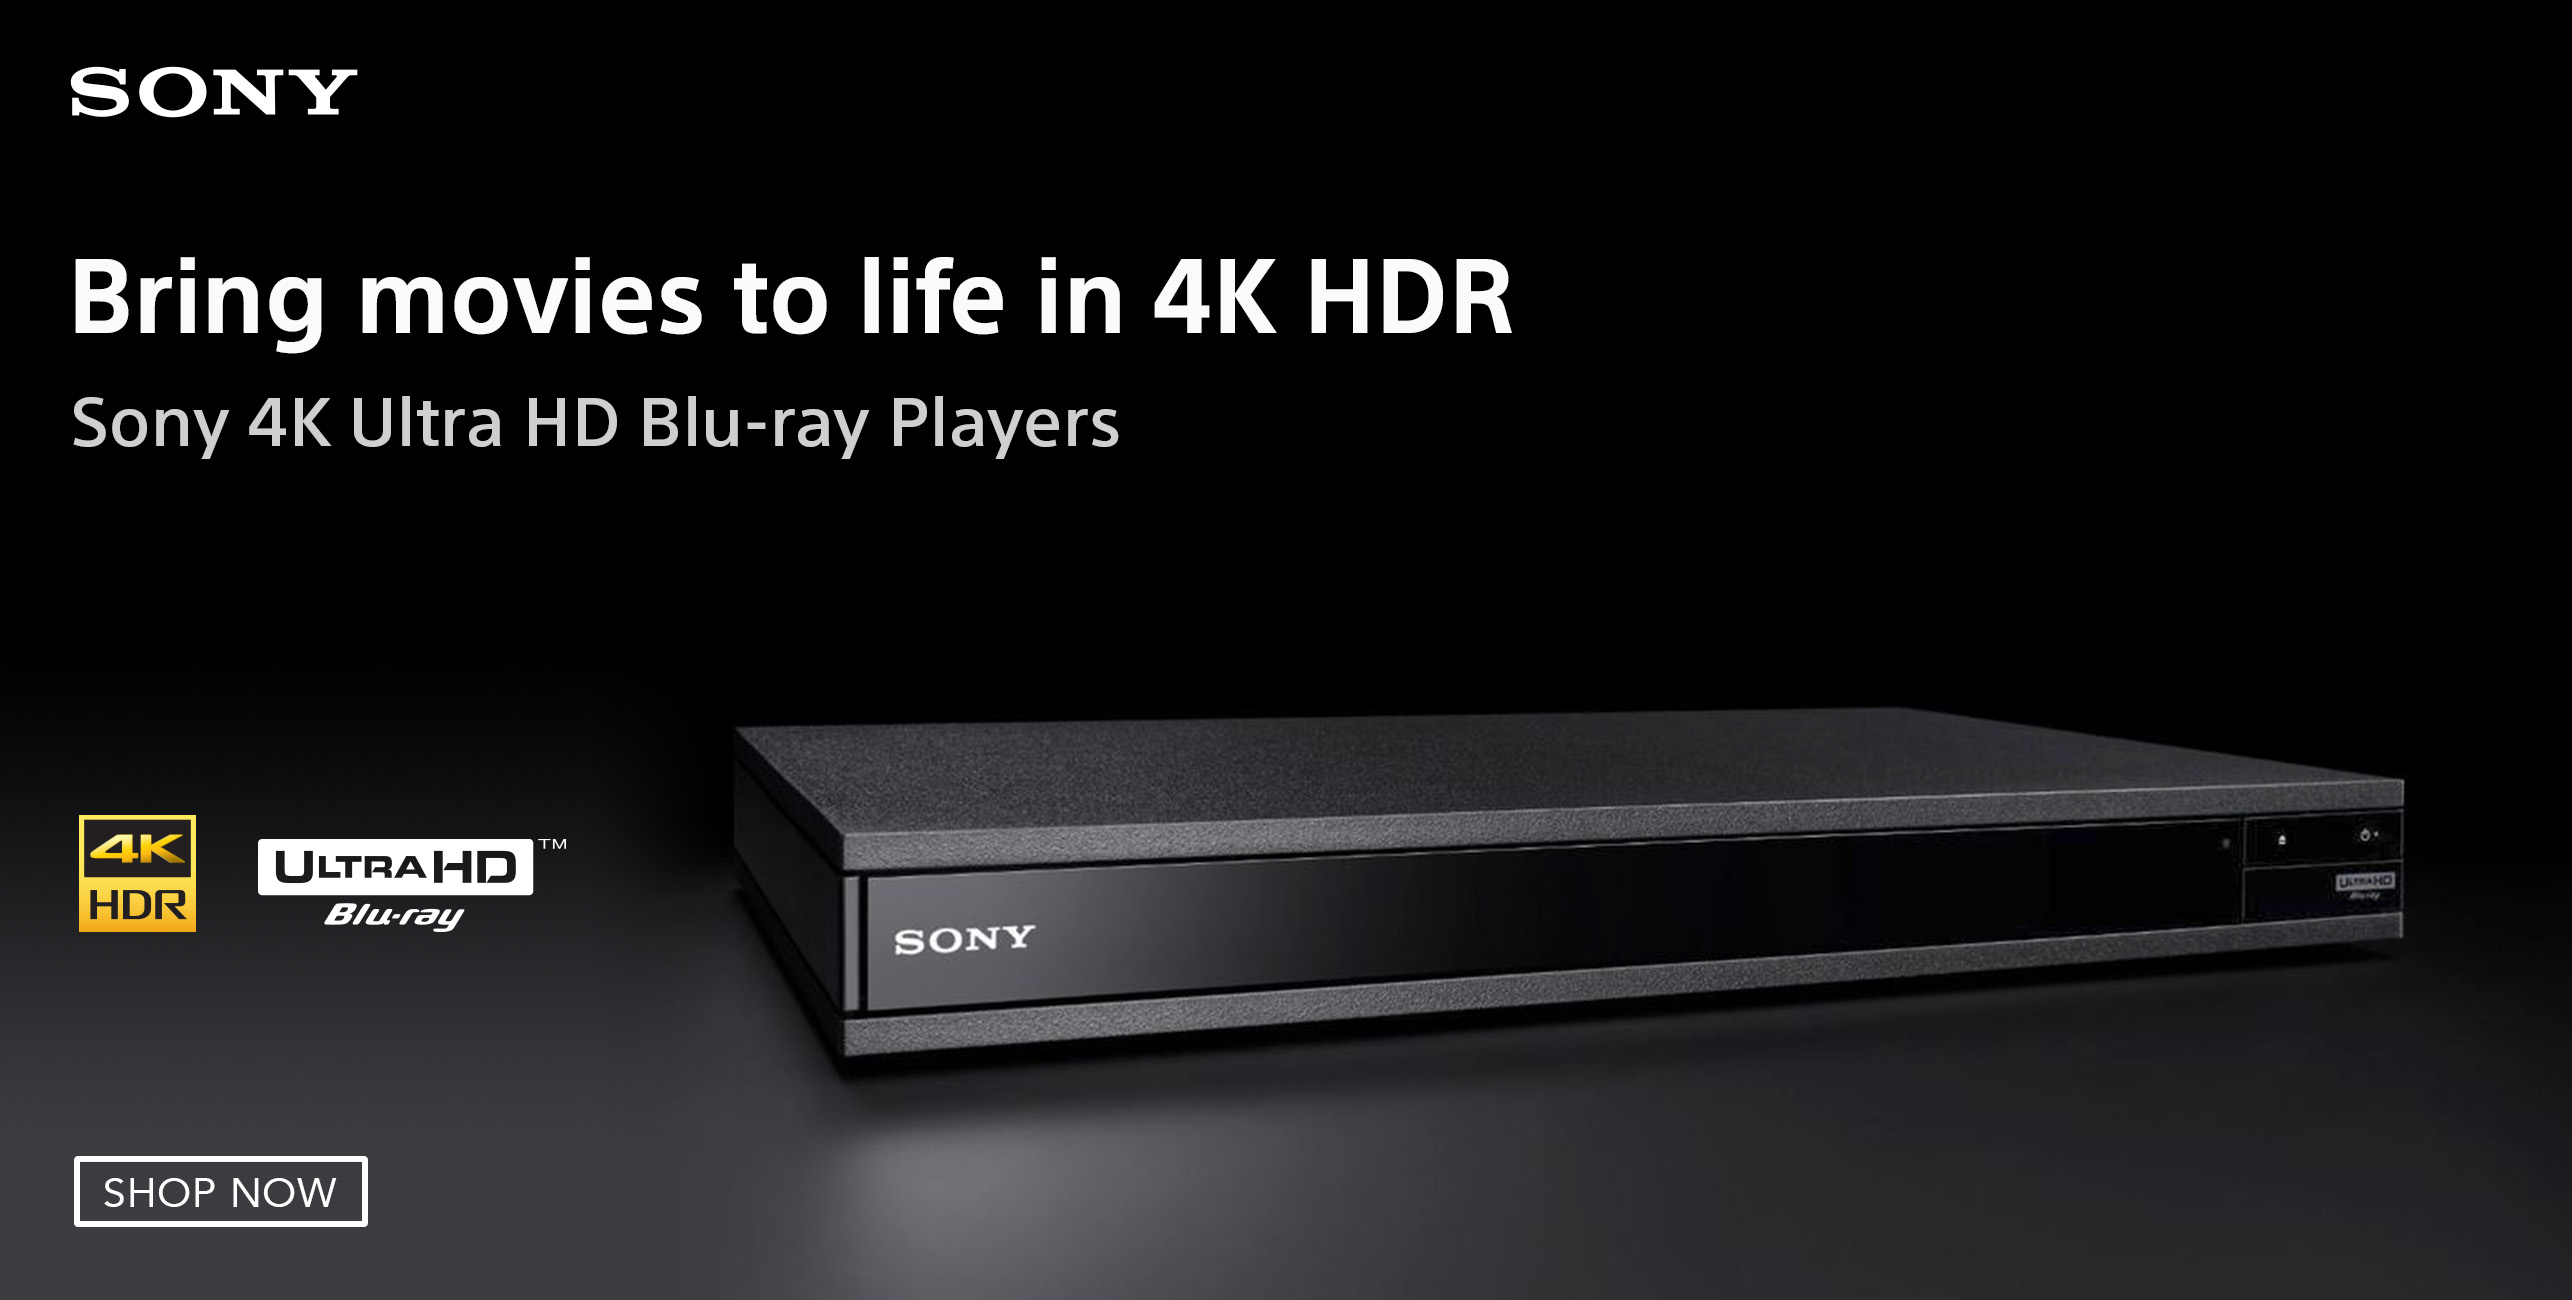 Bring movies to life in 4K HDR. Sony 4K Ultra HD Blu-ray Players. Shop Now.